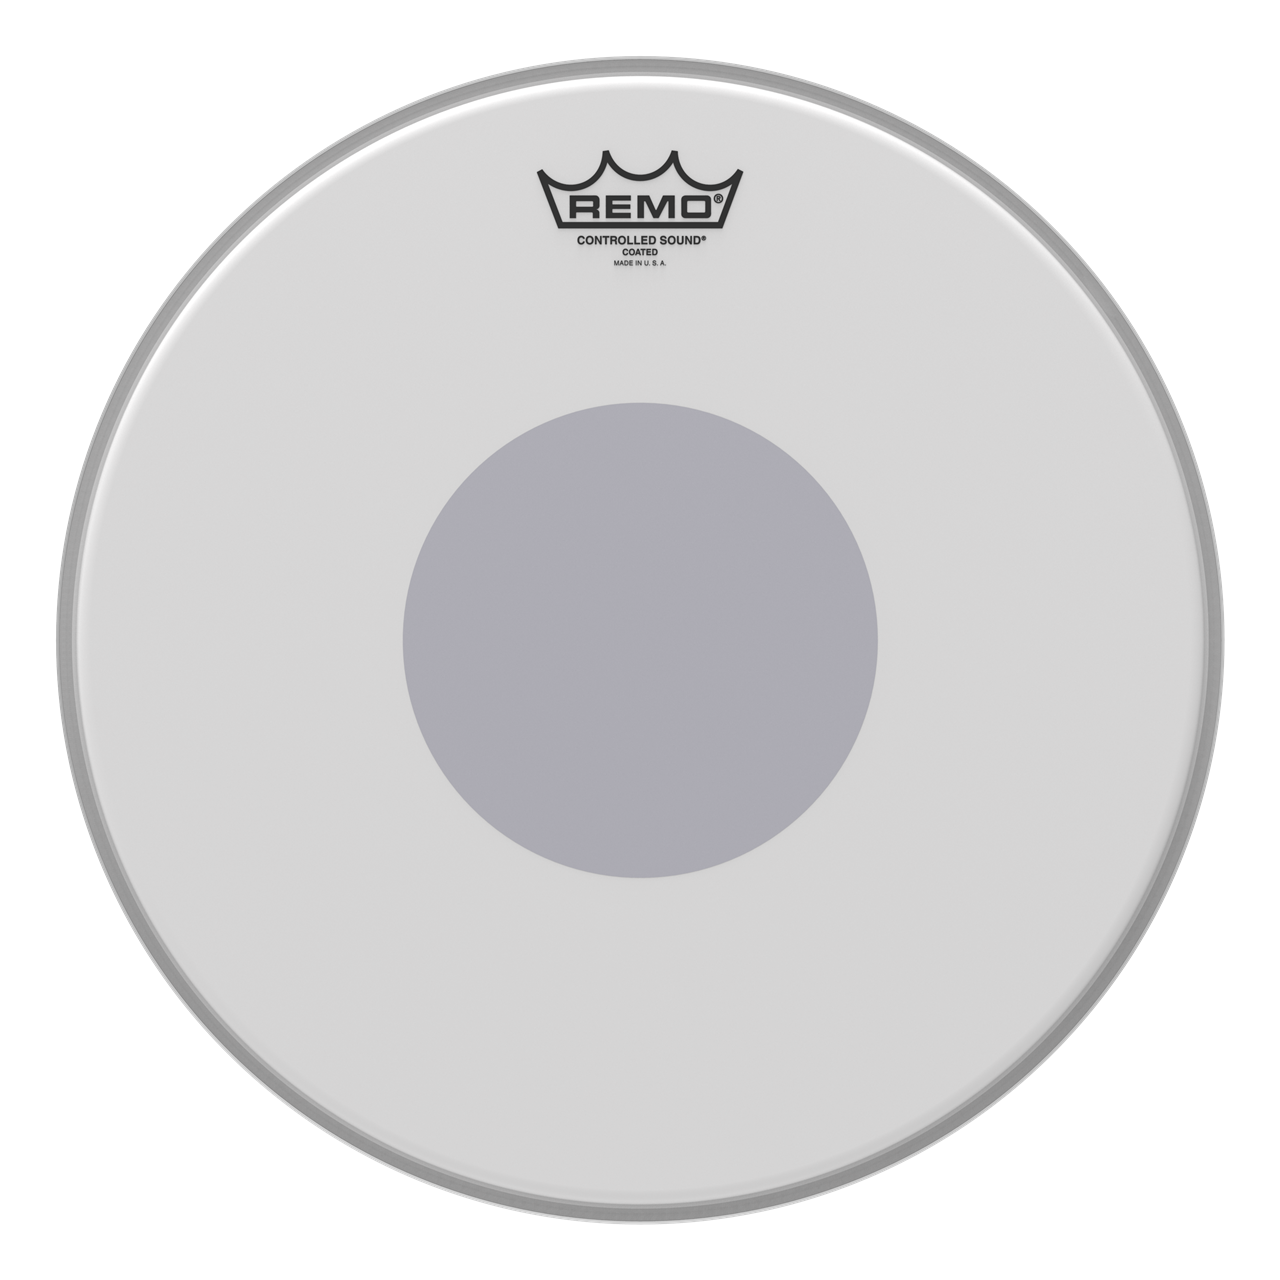 Remo CS-0114-10 Controlled Sound, 14" Coated, Black Dot